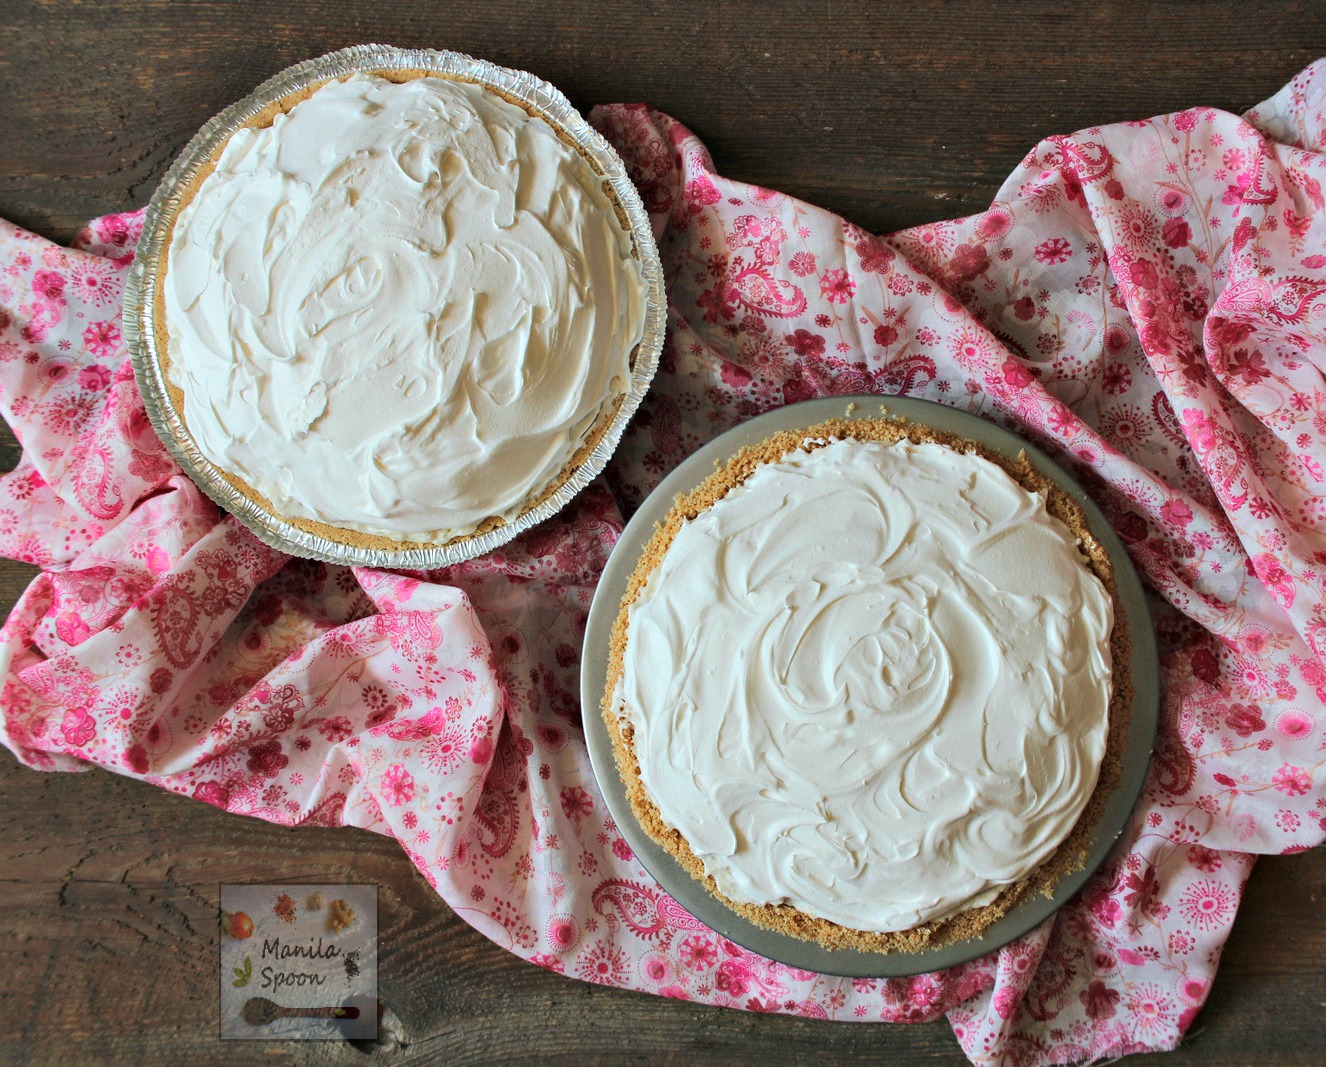 In 15 minutes or less you can make this easy and yummy classic summer pie that's creamy, fruity-sweet, light and no bake, too. We served this in a potluck and it was a huge hit! | manilaspoon.com